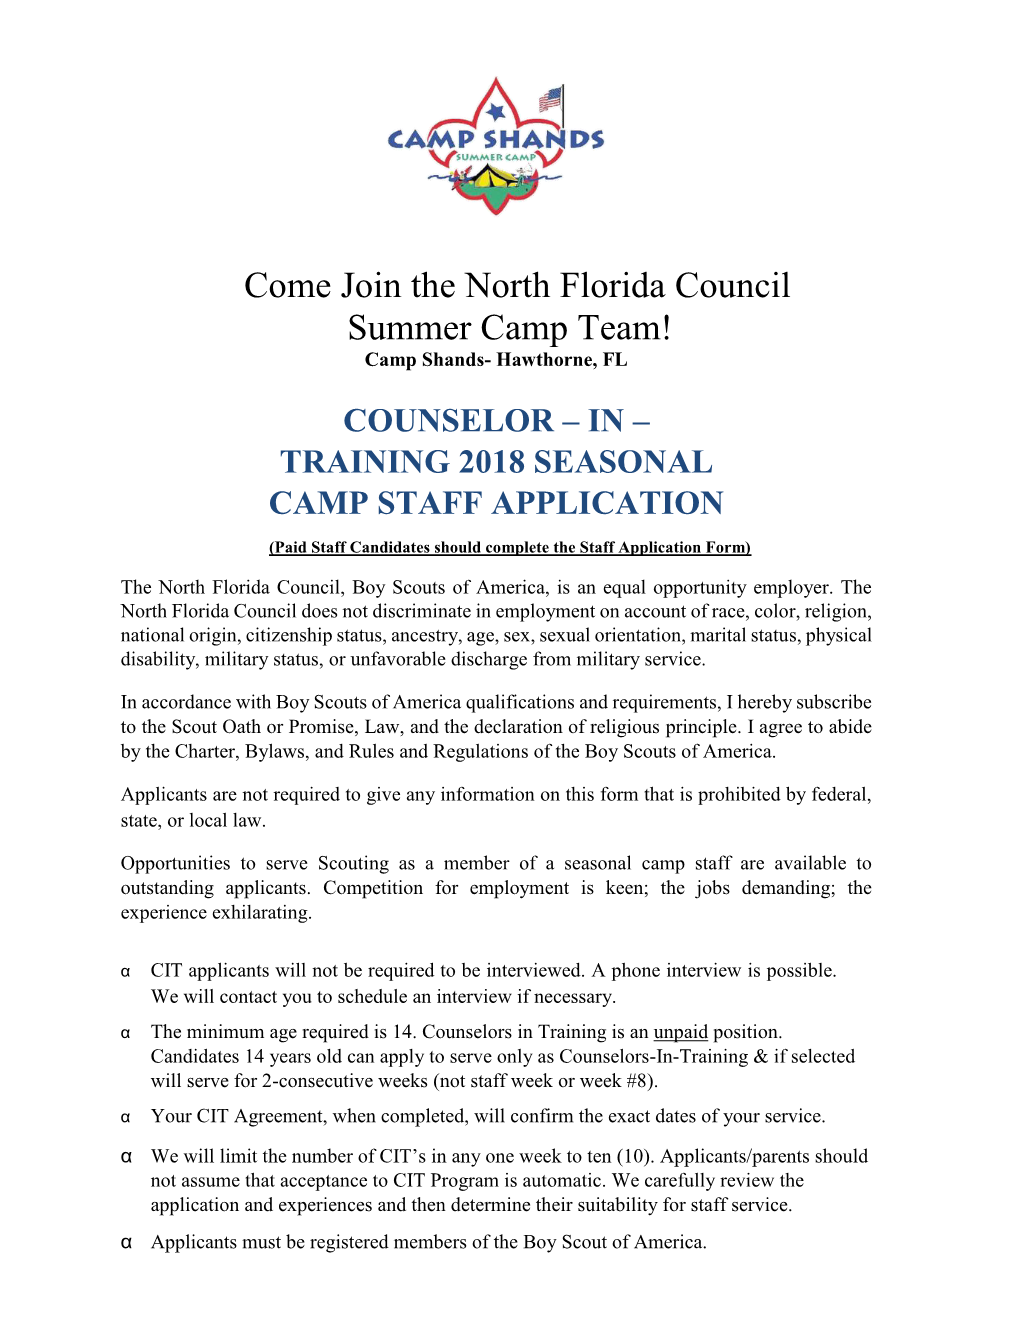 Come Join the North Florida Council Summer Camp Team! Camp Shands- Hawthorne, FL